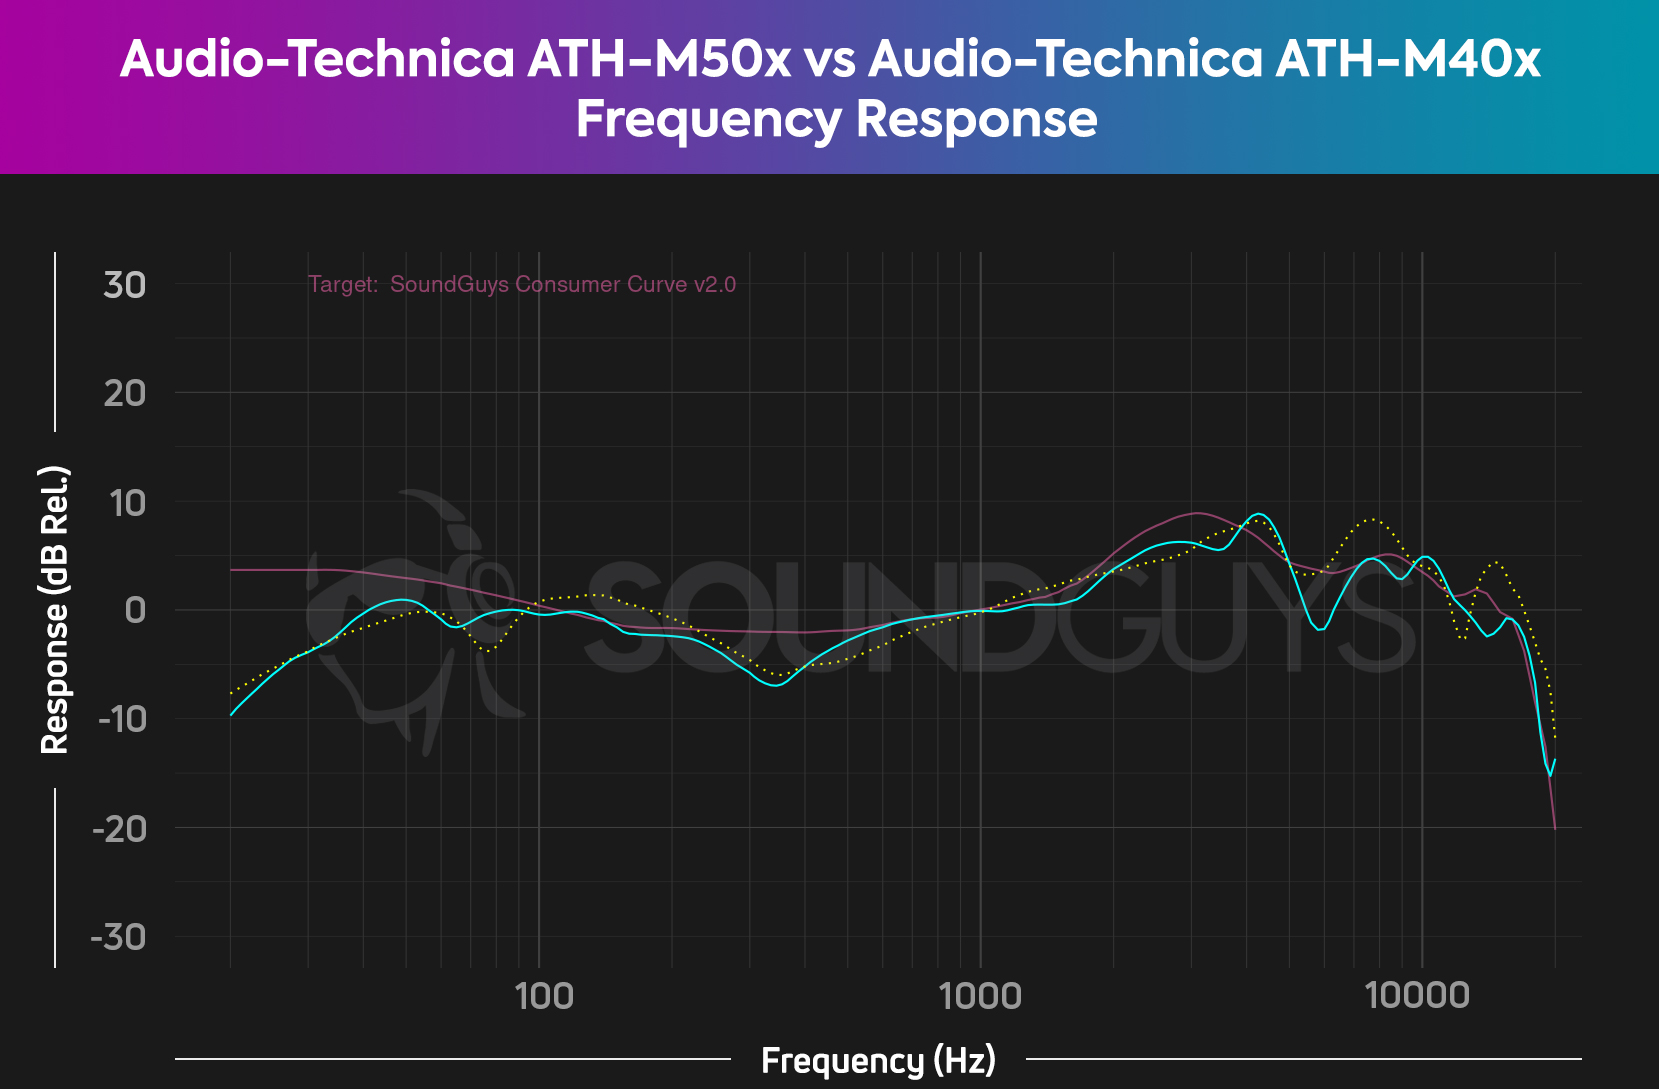 A chart shows the very close to the same frequency responses of the Audio-Technica ATH-M50x and Audio-Technica ATH-M40x as compared to our ideal curve.